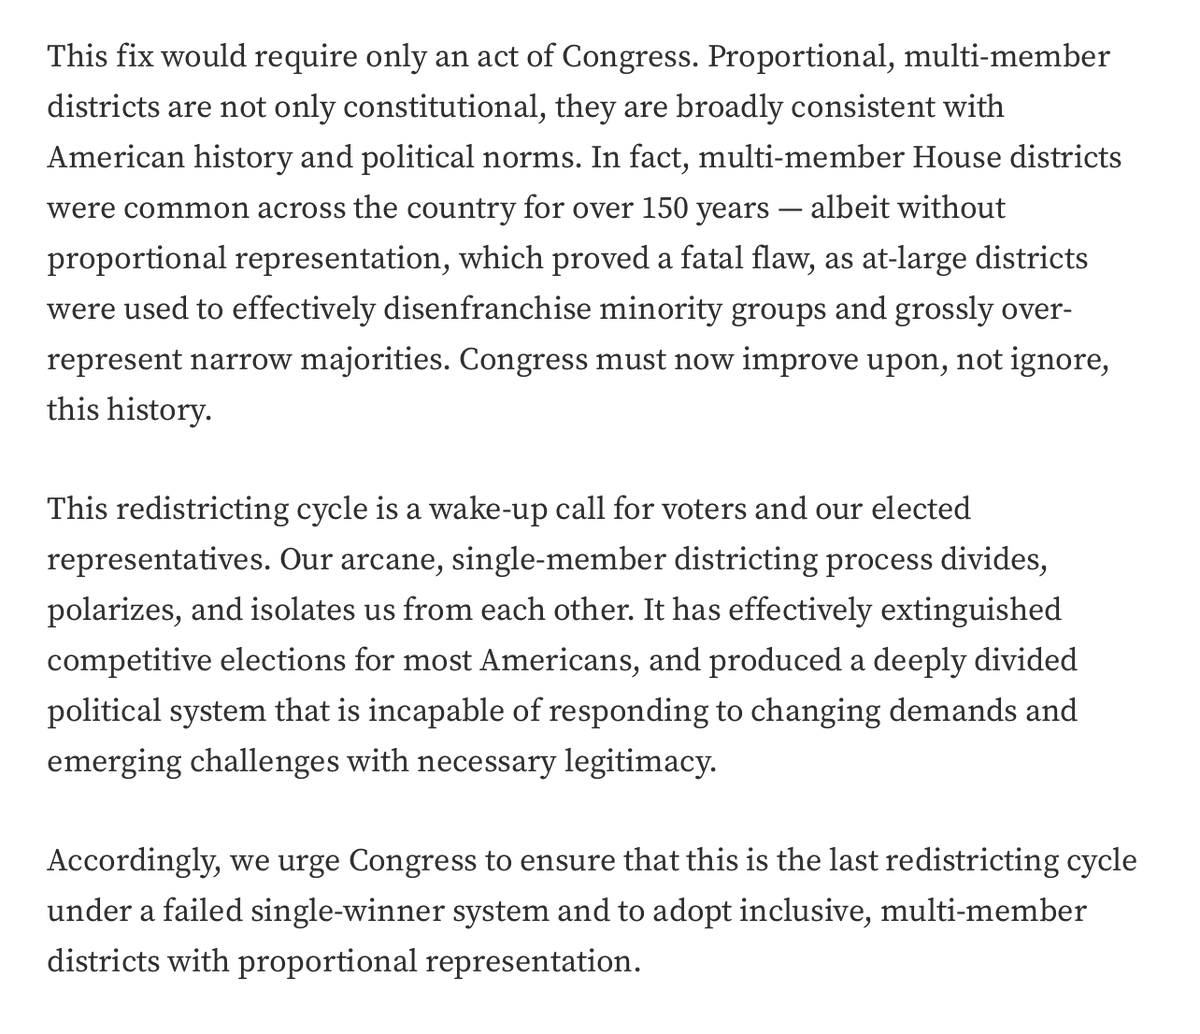 Proud to join more than 200 of my colleagues in calling for a shift to proportional, multi-member districts in Congressional elections - open letter organized by @protctdemocracy is here: medium.com/@scholars-redi…